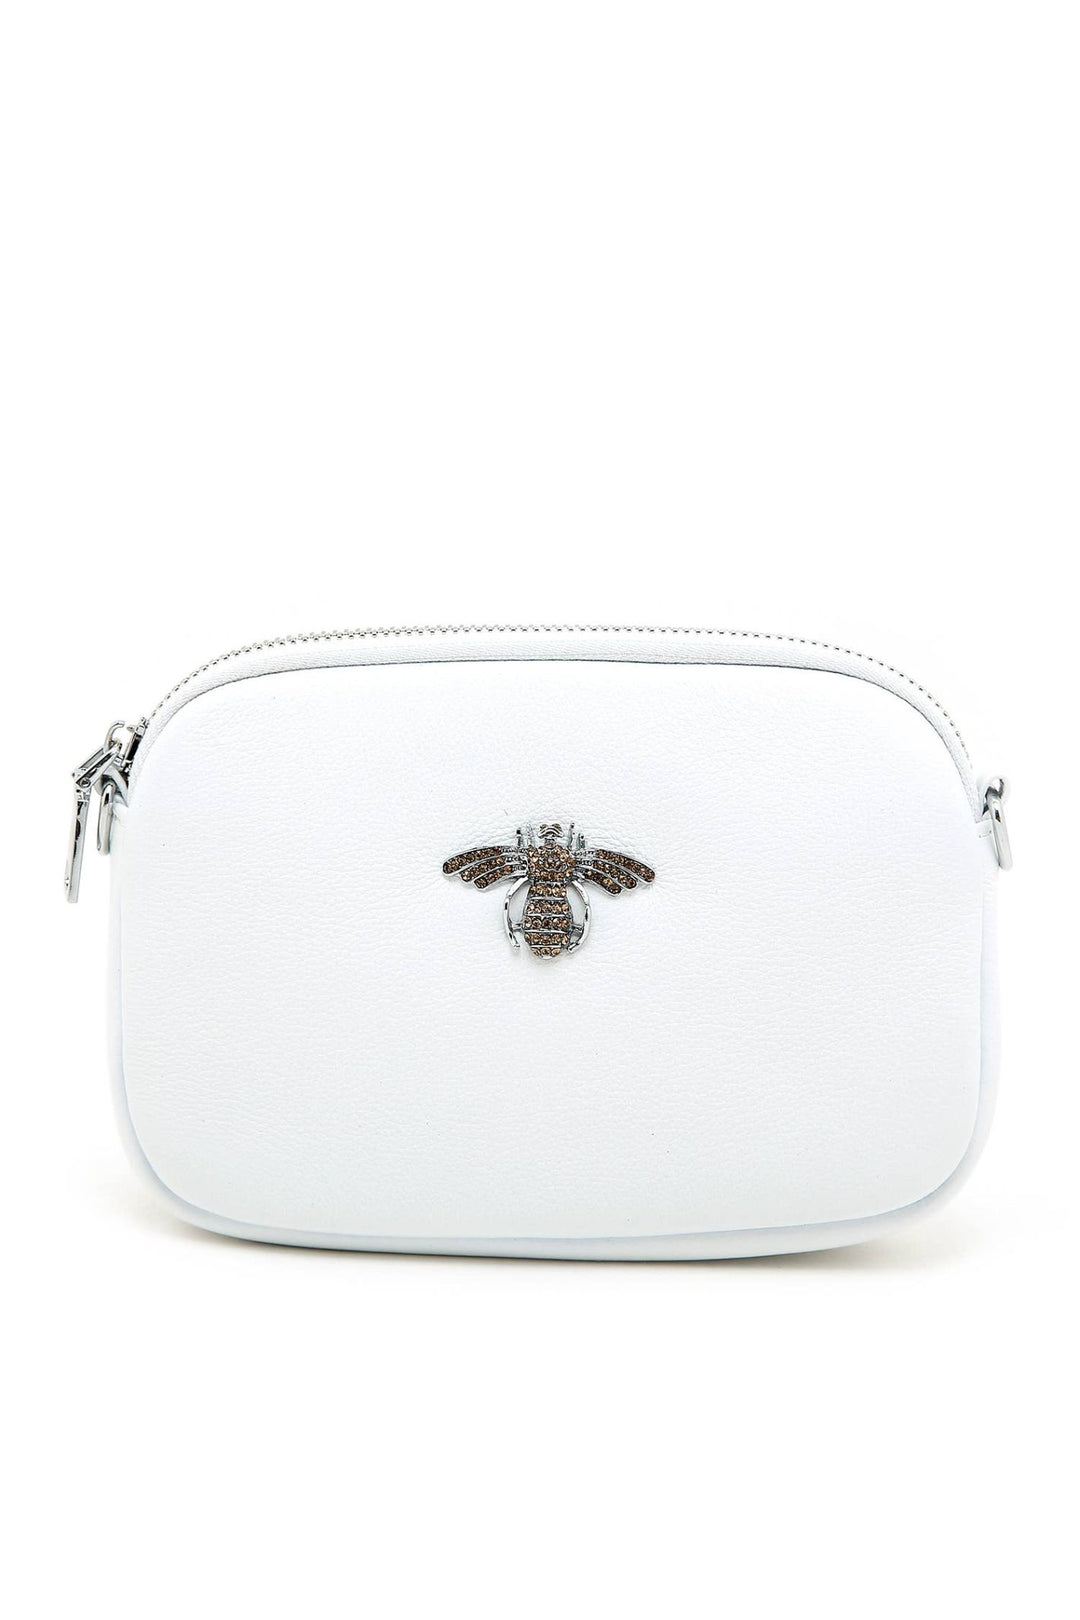 White Leather Bee Crystal Cross Body Bag